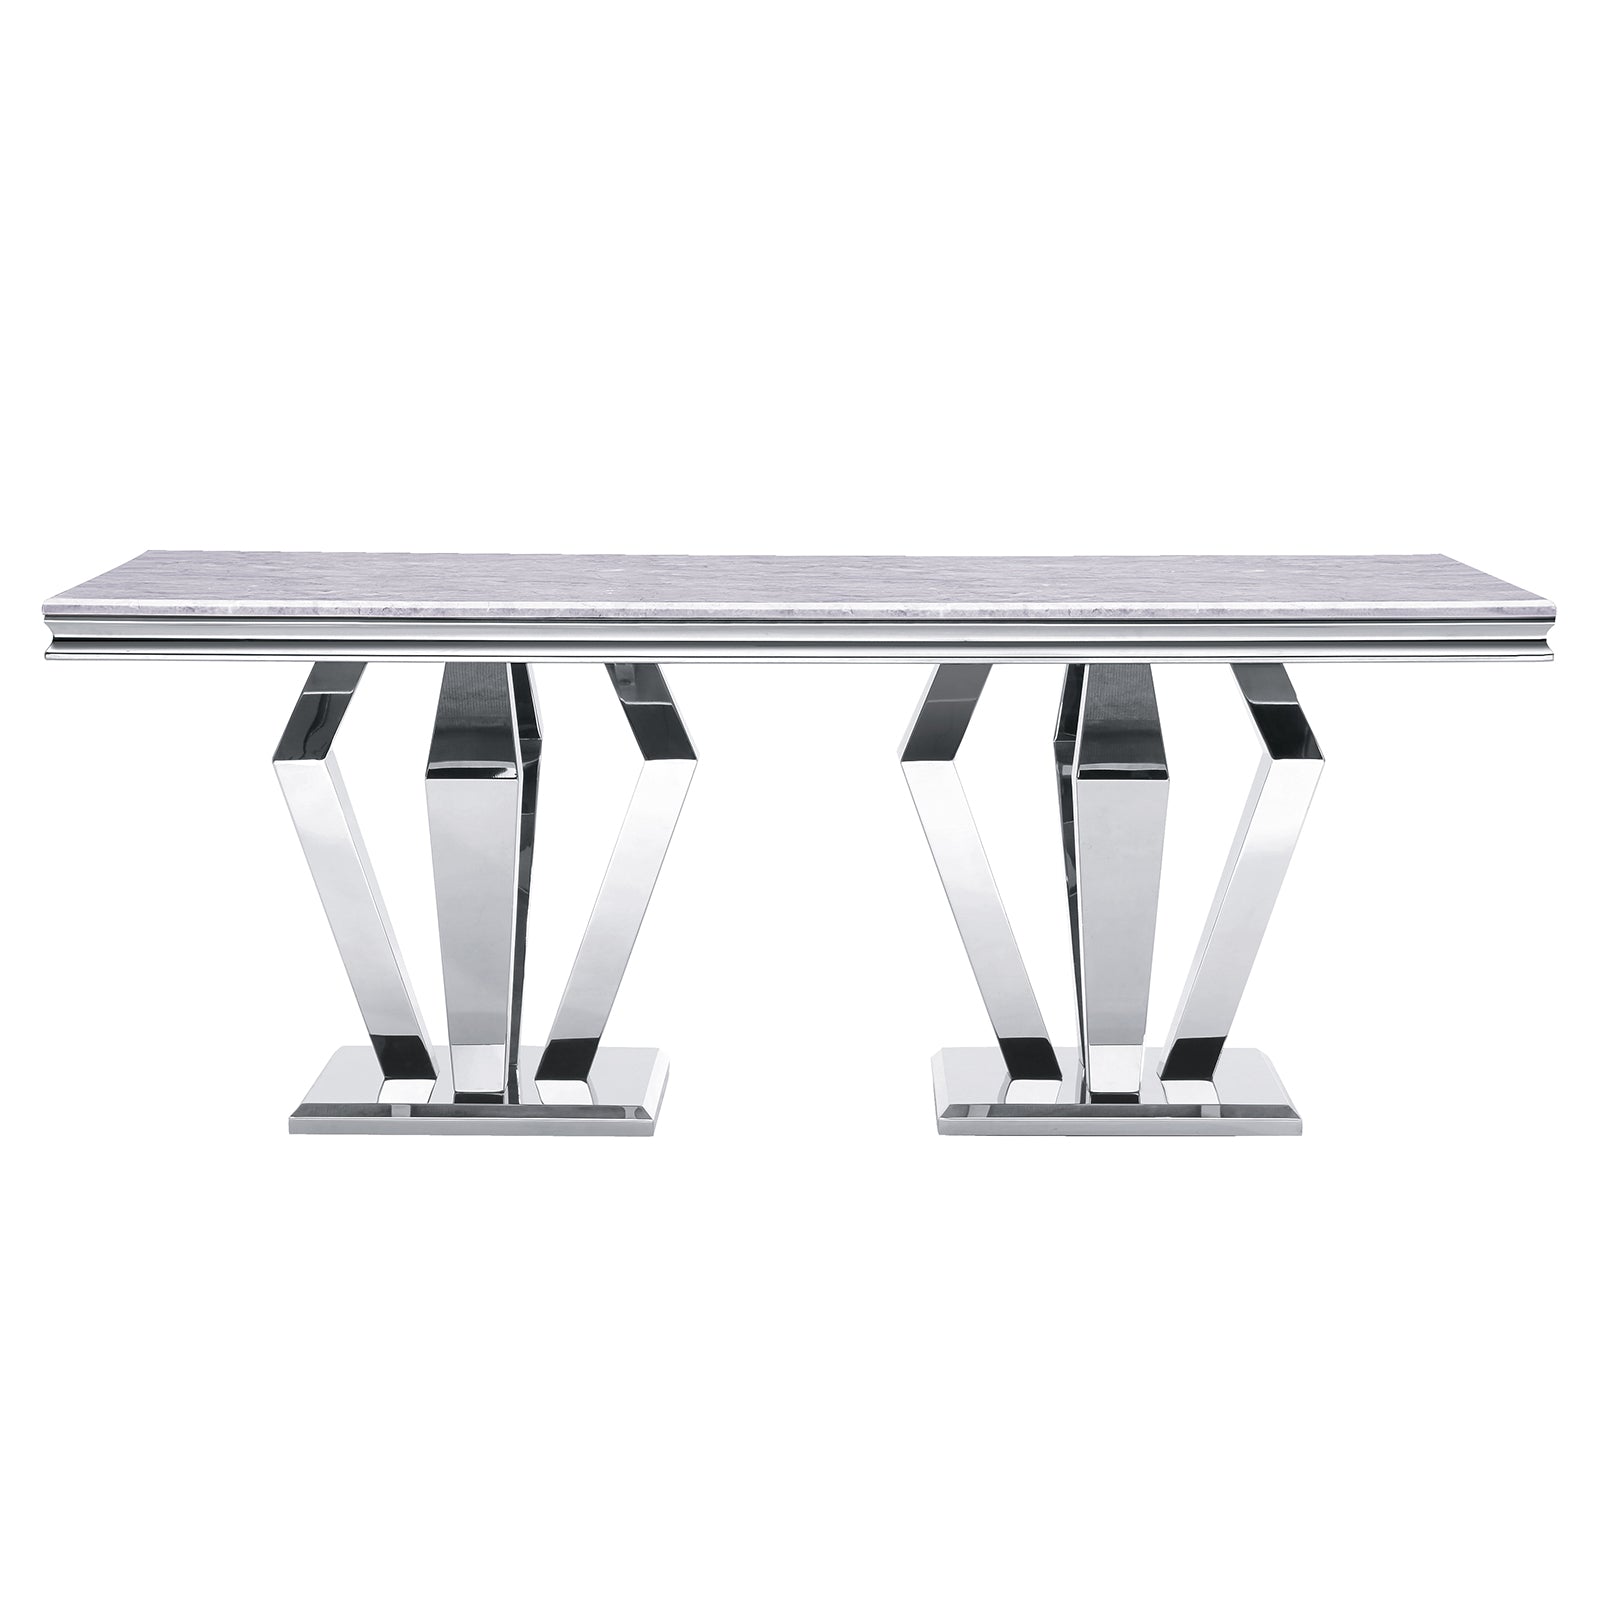 Dining table for 8 people | 78" Gray Top | Metal Four geometric legs | T210